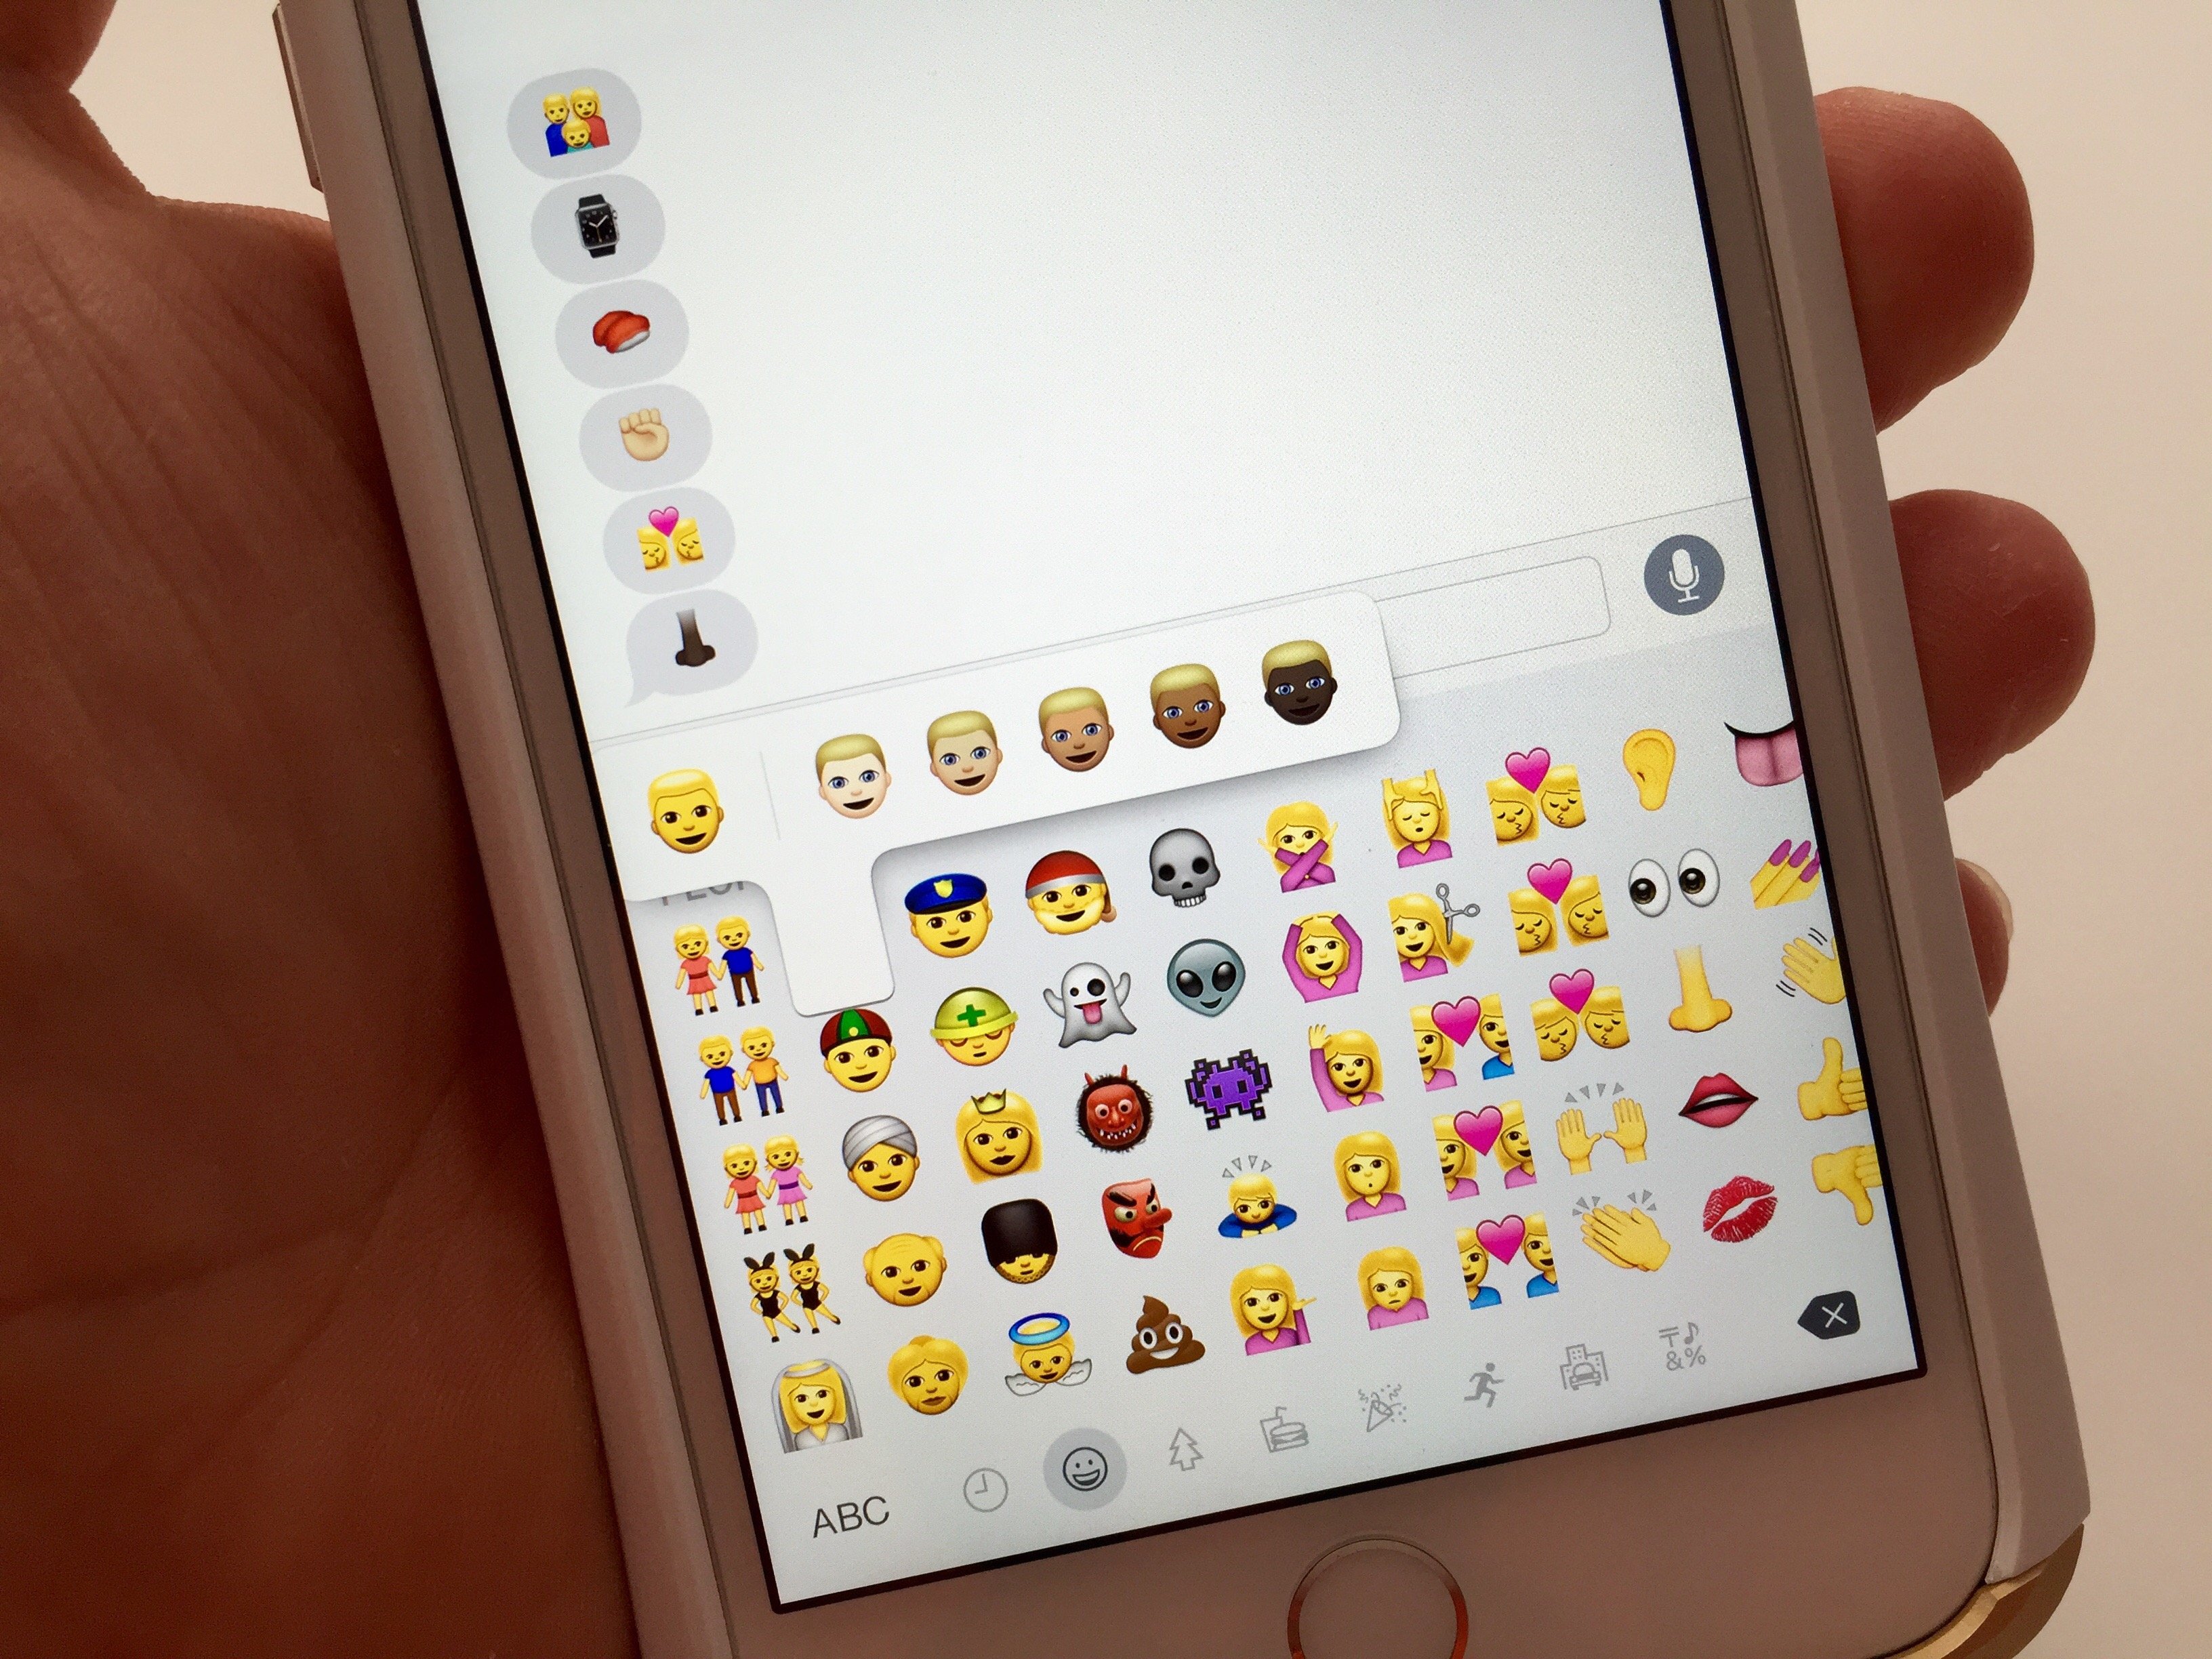 Apple adds many new iOS 8.3 features like the Emoji shown above, and dozens of fixes for iOS 8 problems.